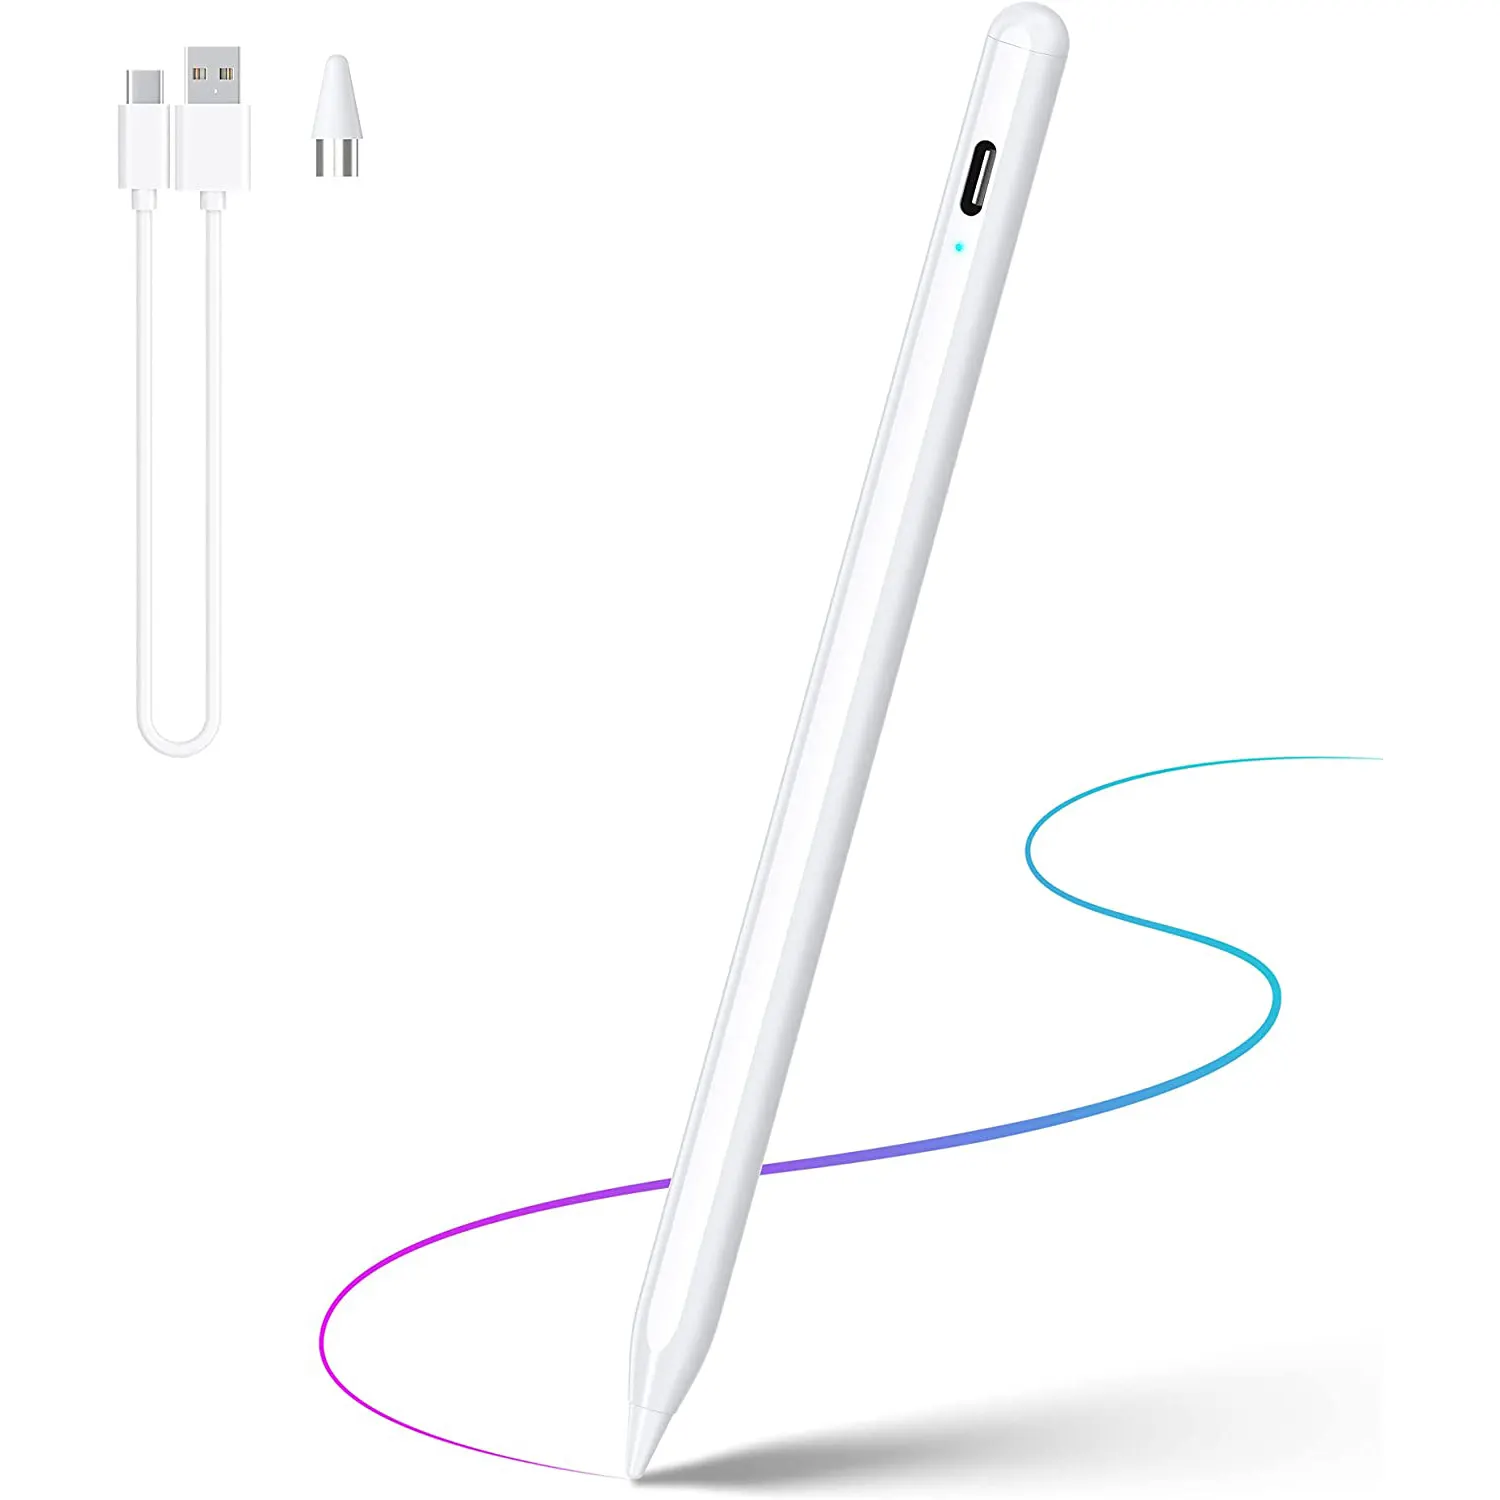 ipad accessories universal touch screen pencil drawing stylus pencil Touch Pen for iPhone iPad Android IOS